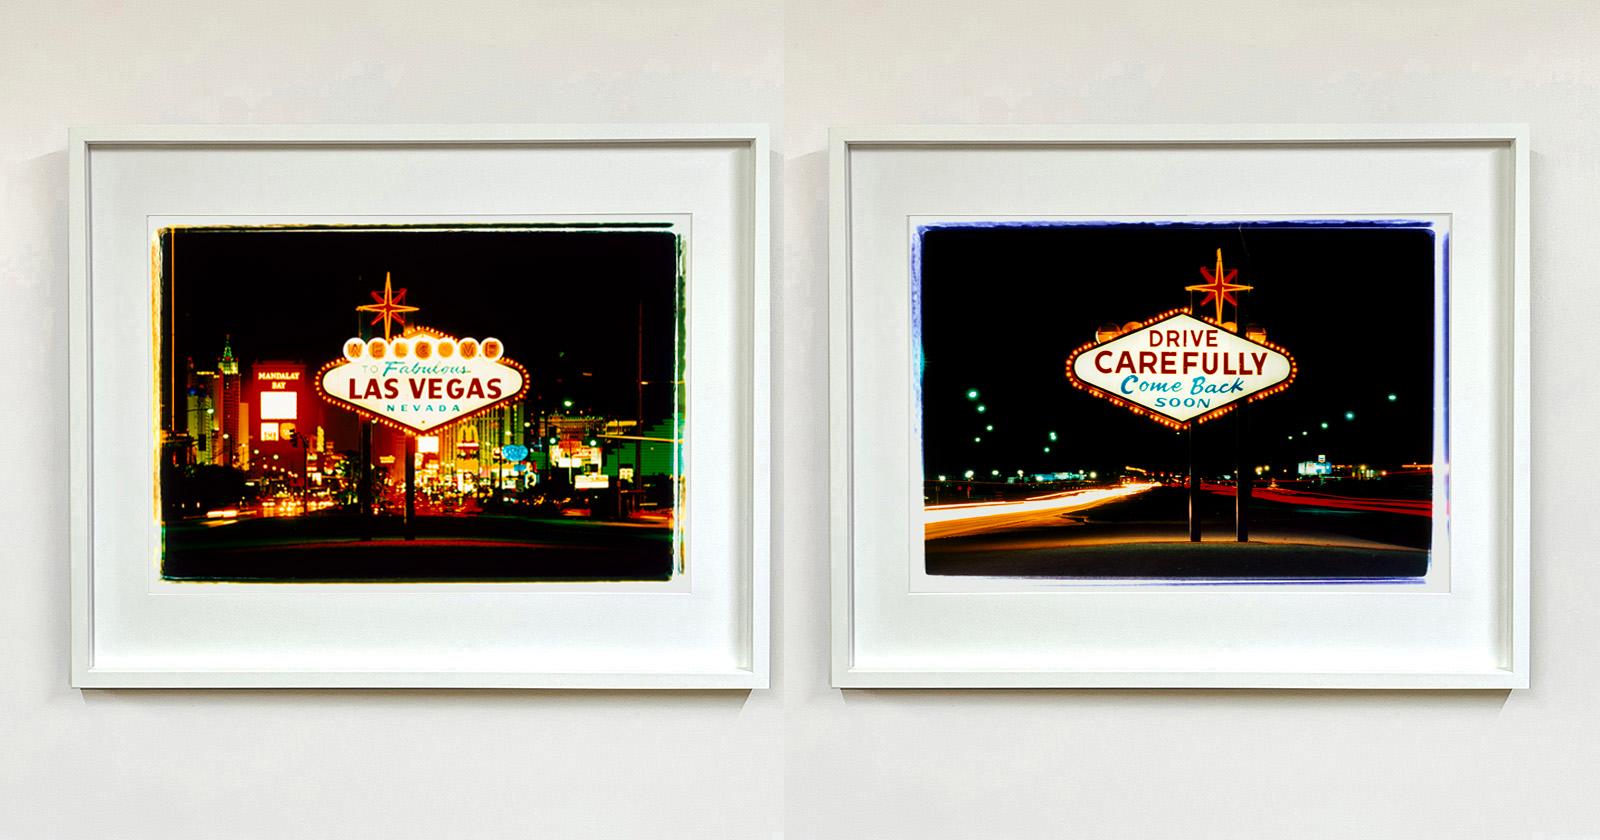 Arriving, Las Vegas, photograph from Richard Heeps' 'Dream in Colour' series, this artwork captures a classic American neon Googie sign, with the famous Vegas cityscape in the background. 

This artwork is a limited edition of 25, gloss photographic